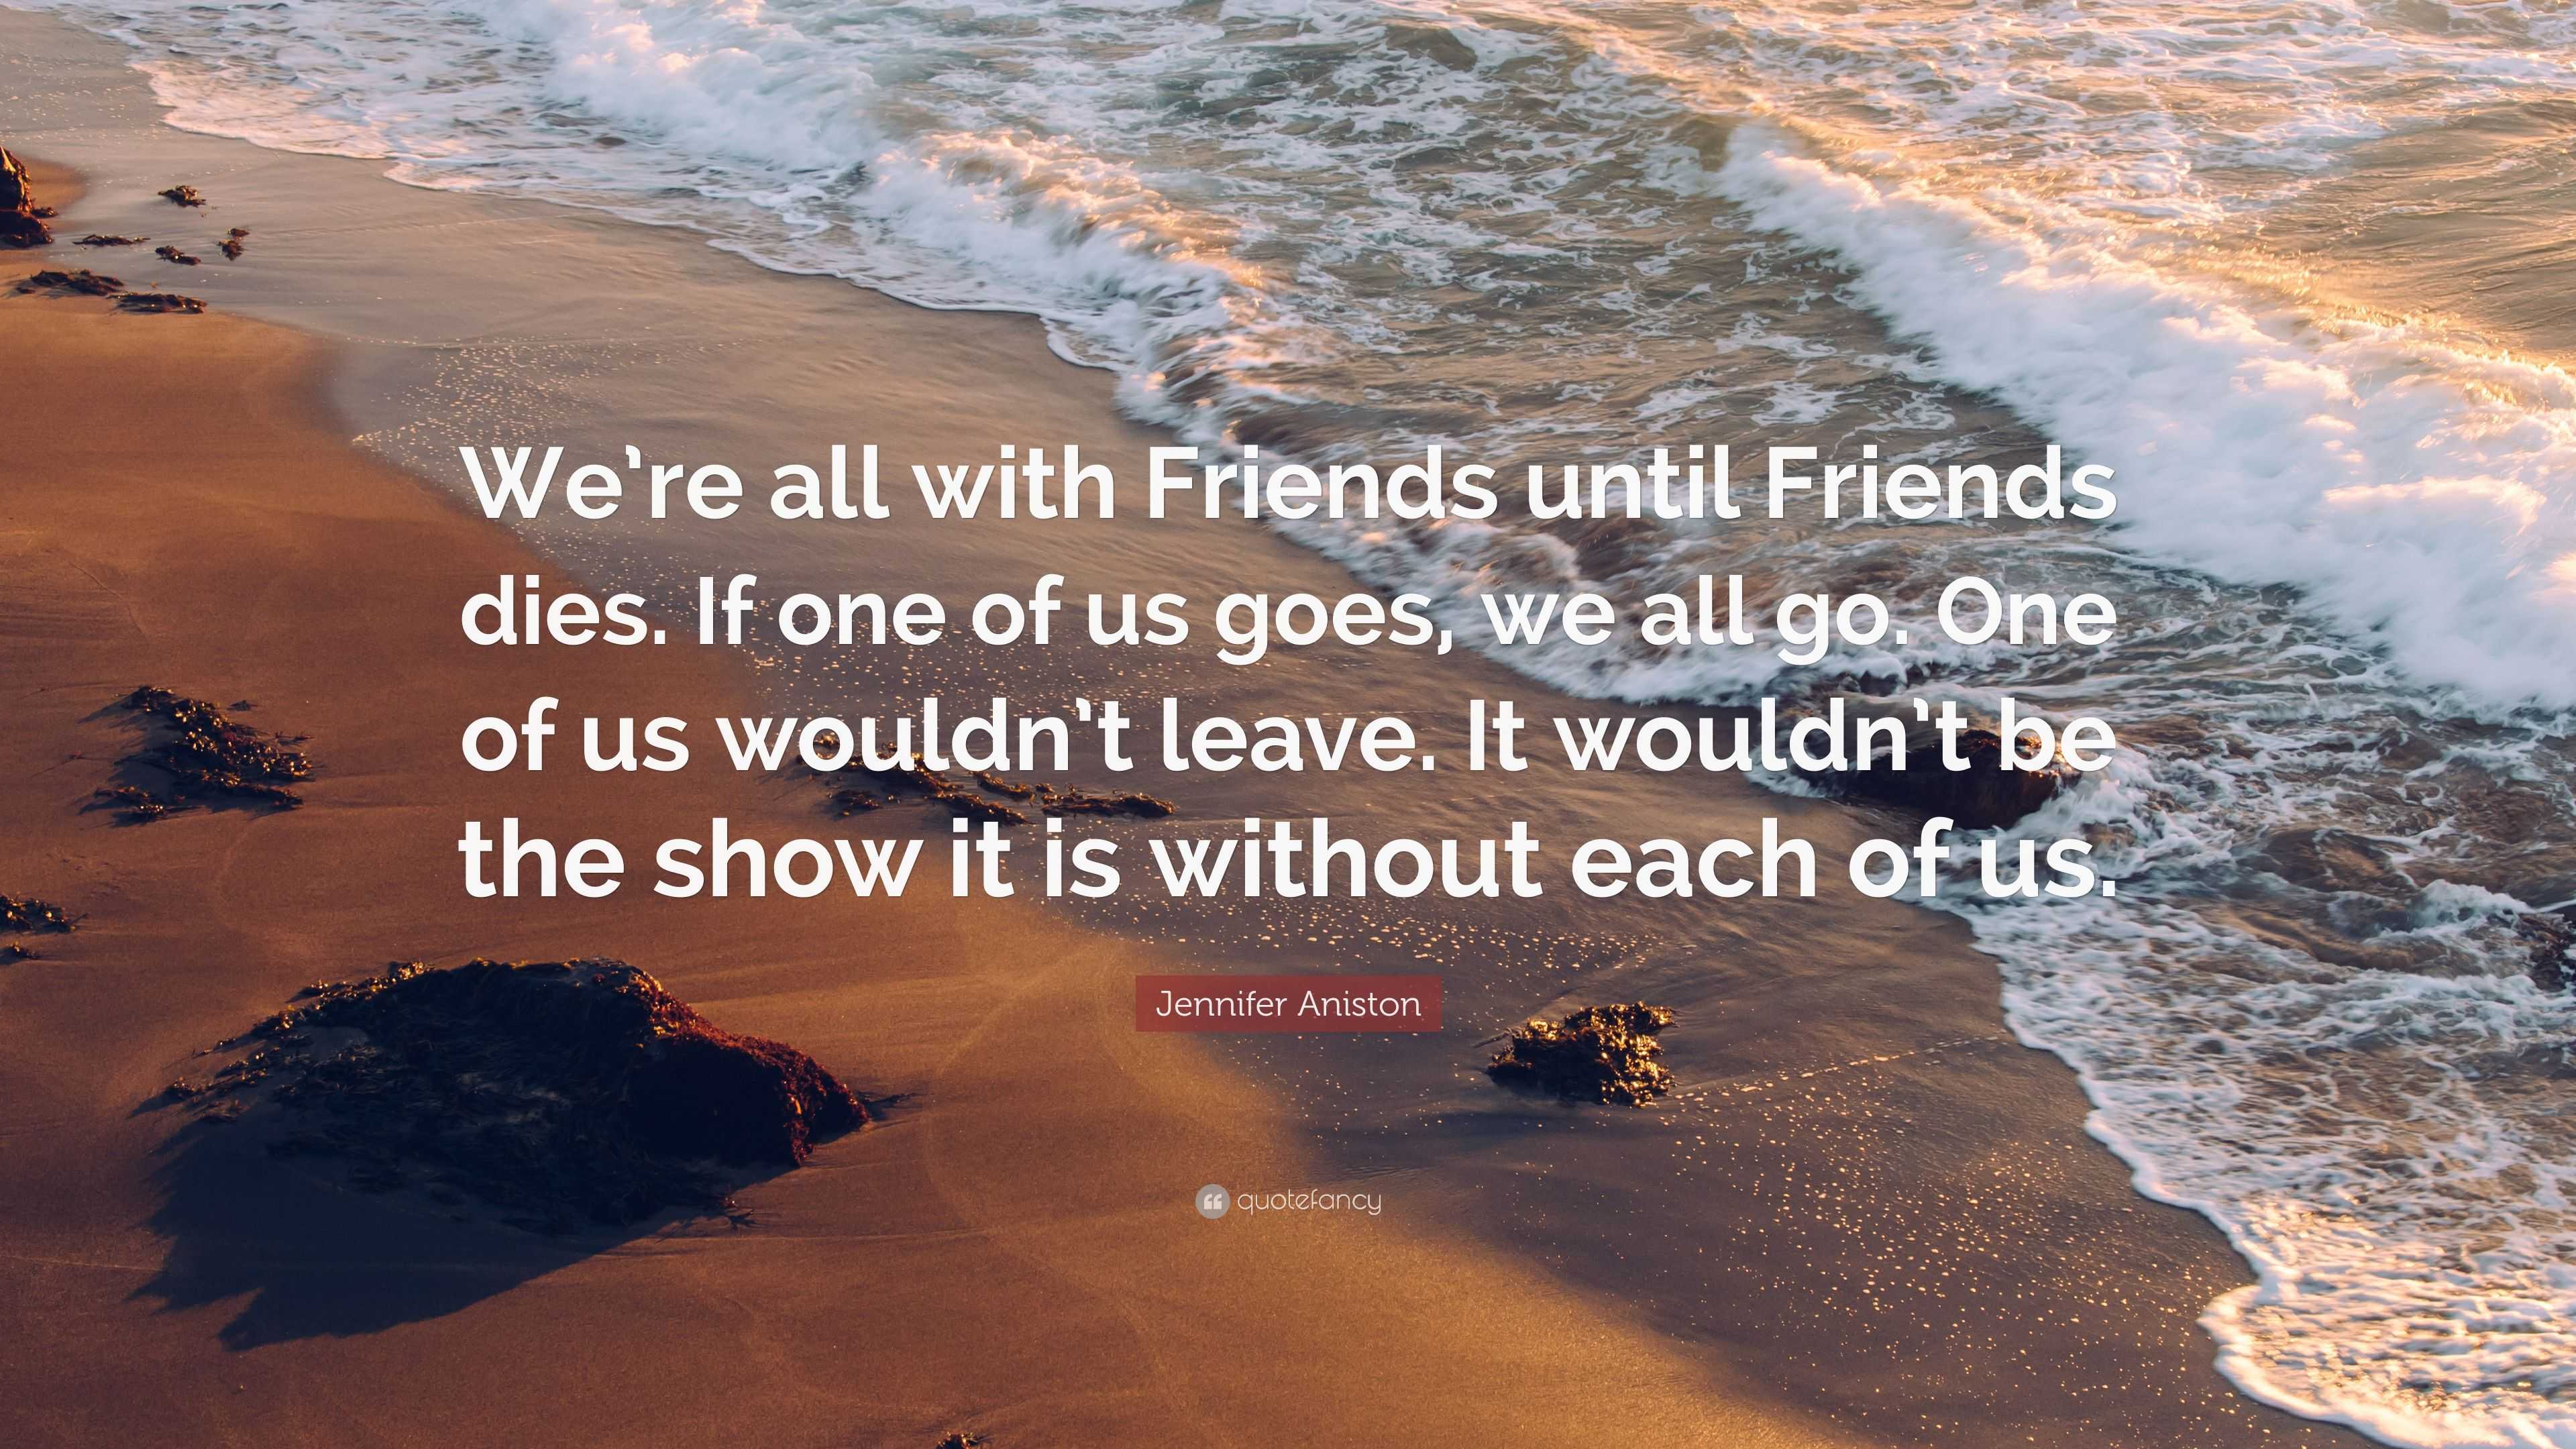 Jennifer Aniston Quote: “We’re all with Friends until Friends dies. If ...